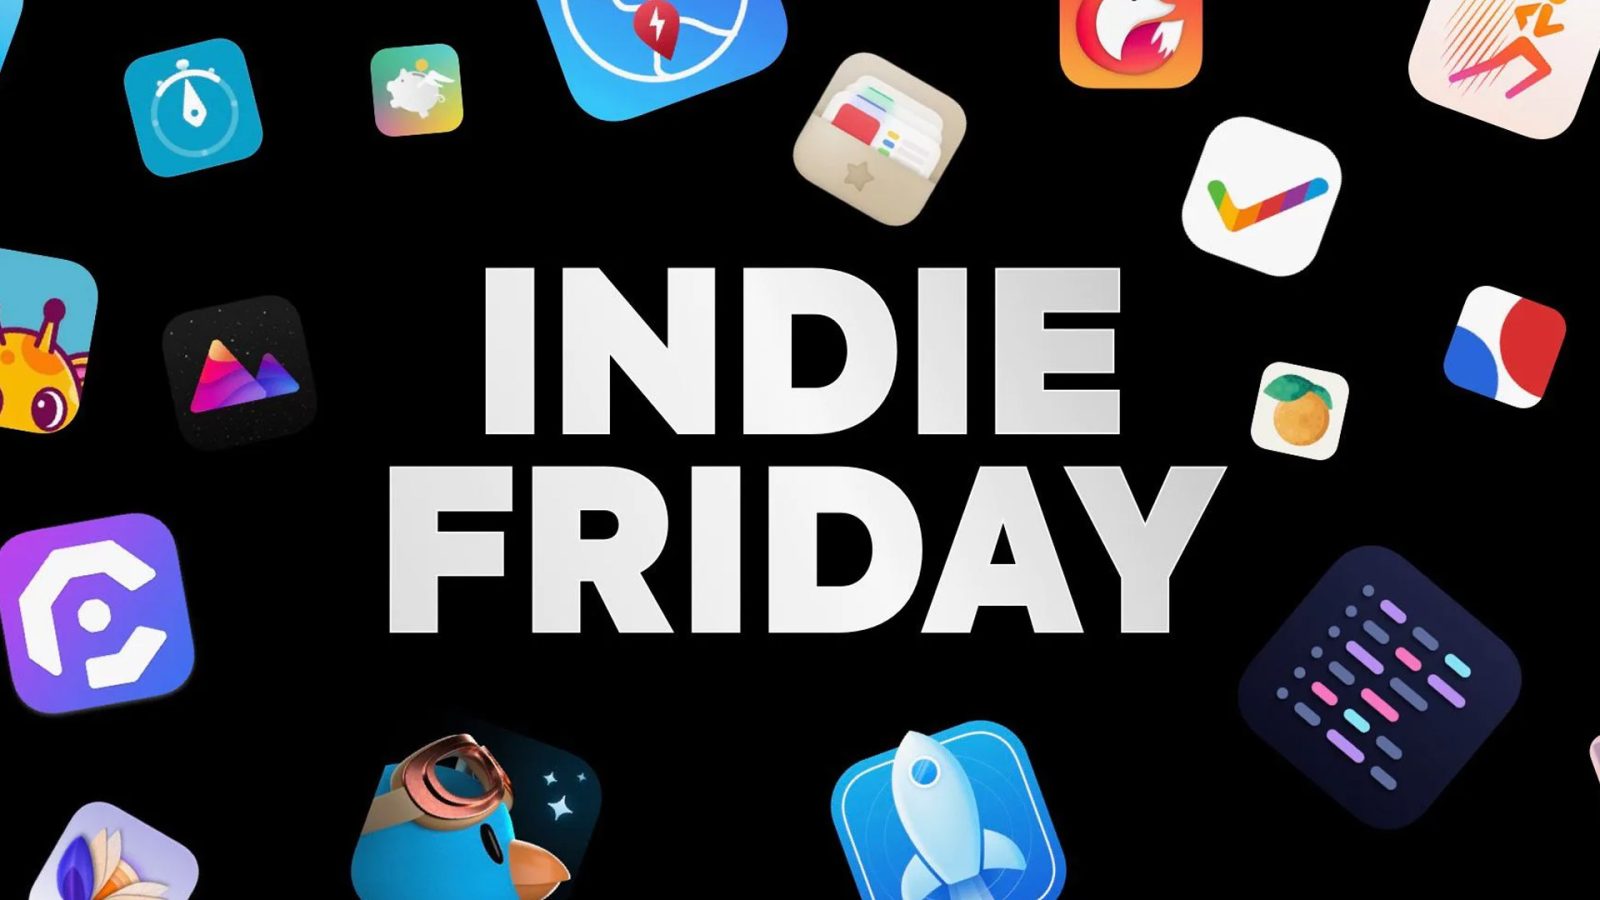 Black Friday deals on iOS and macOS apps from indie developers